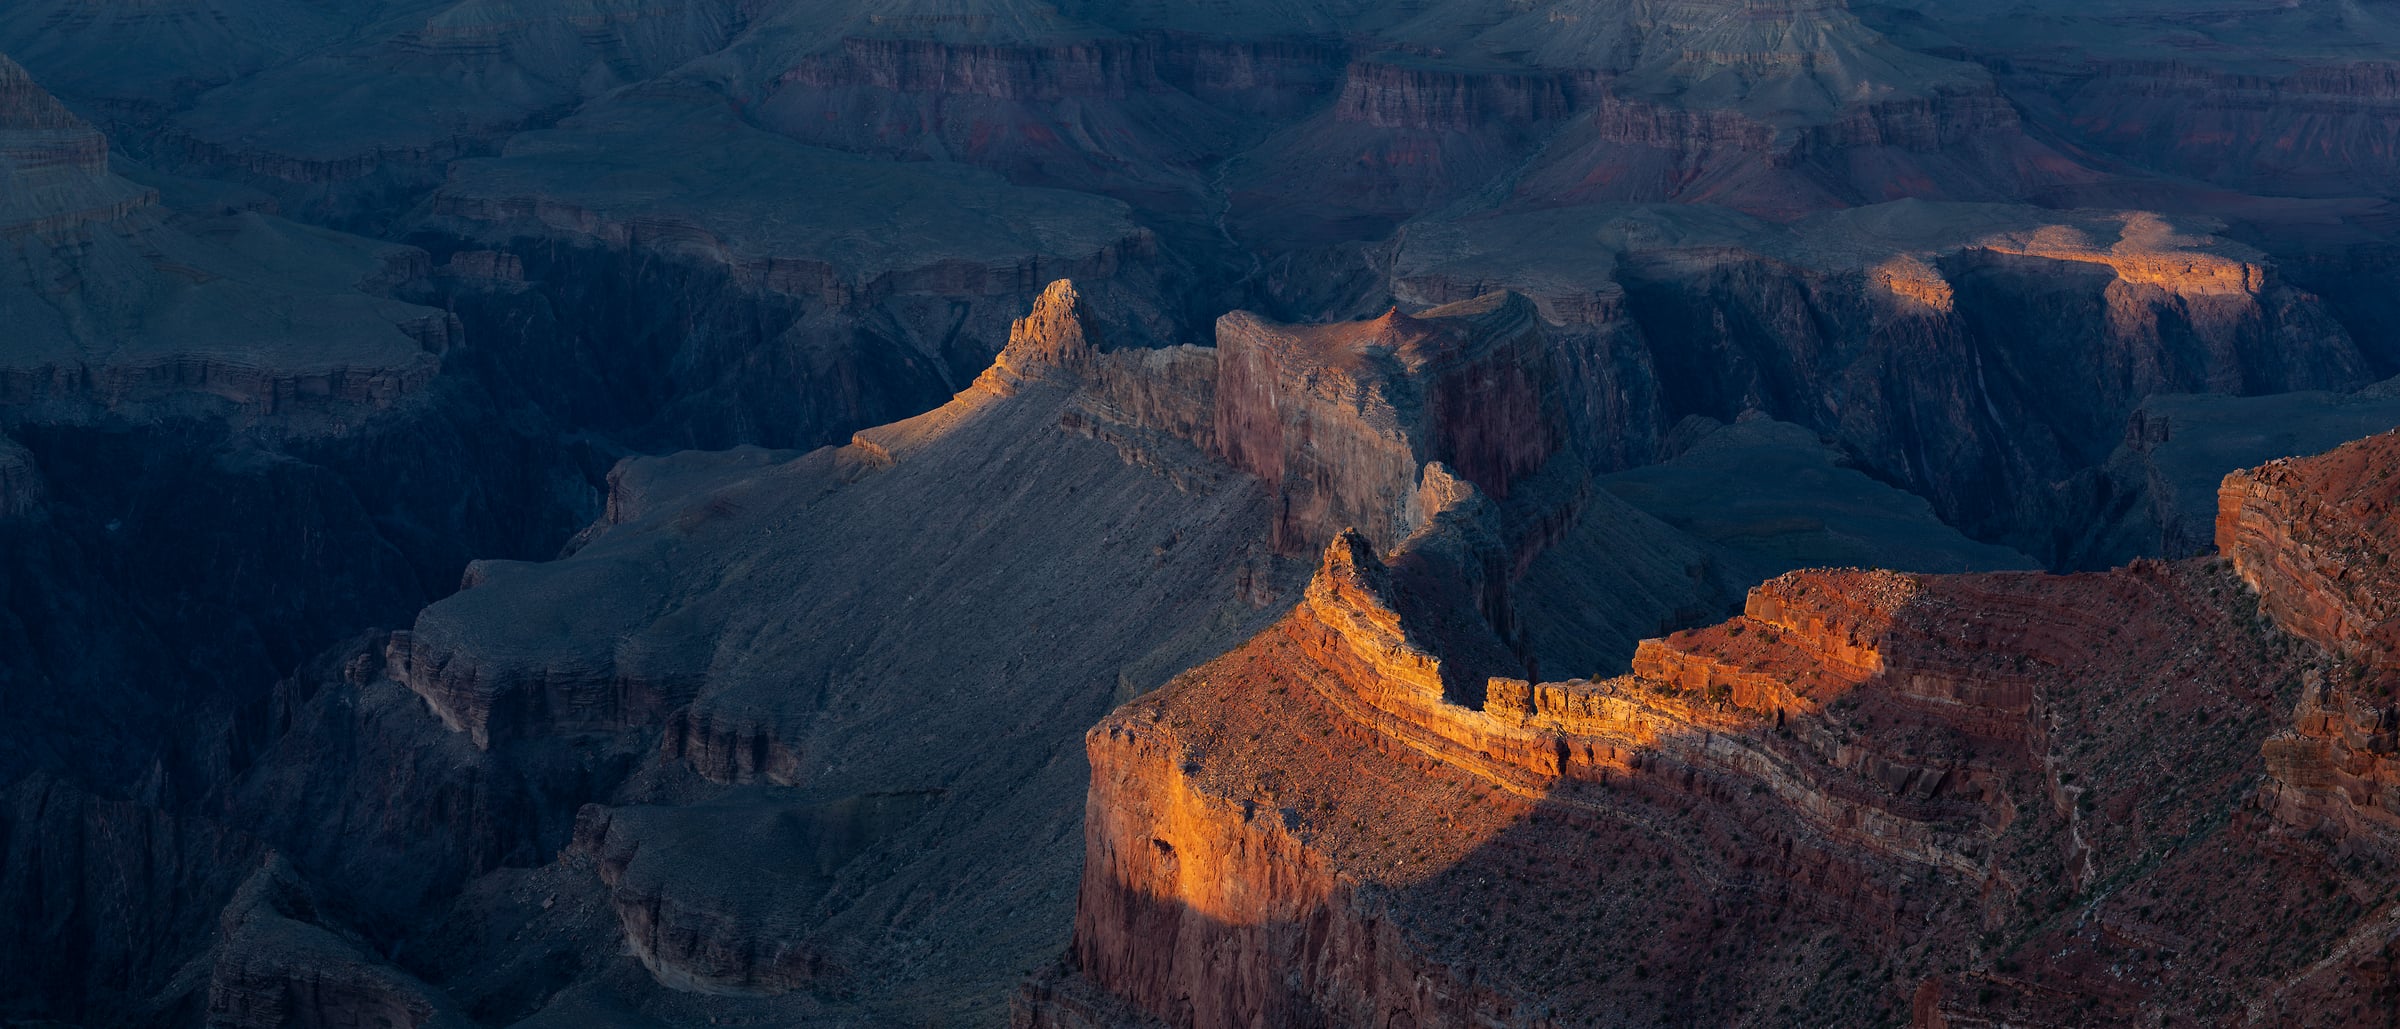 352 megapixels! A very high resolution, artistic photo print of the Grand Canyon at sunset; landscape photograph created by Greg Probst in Grand Canyon National Park, Arizona.